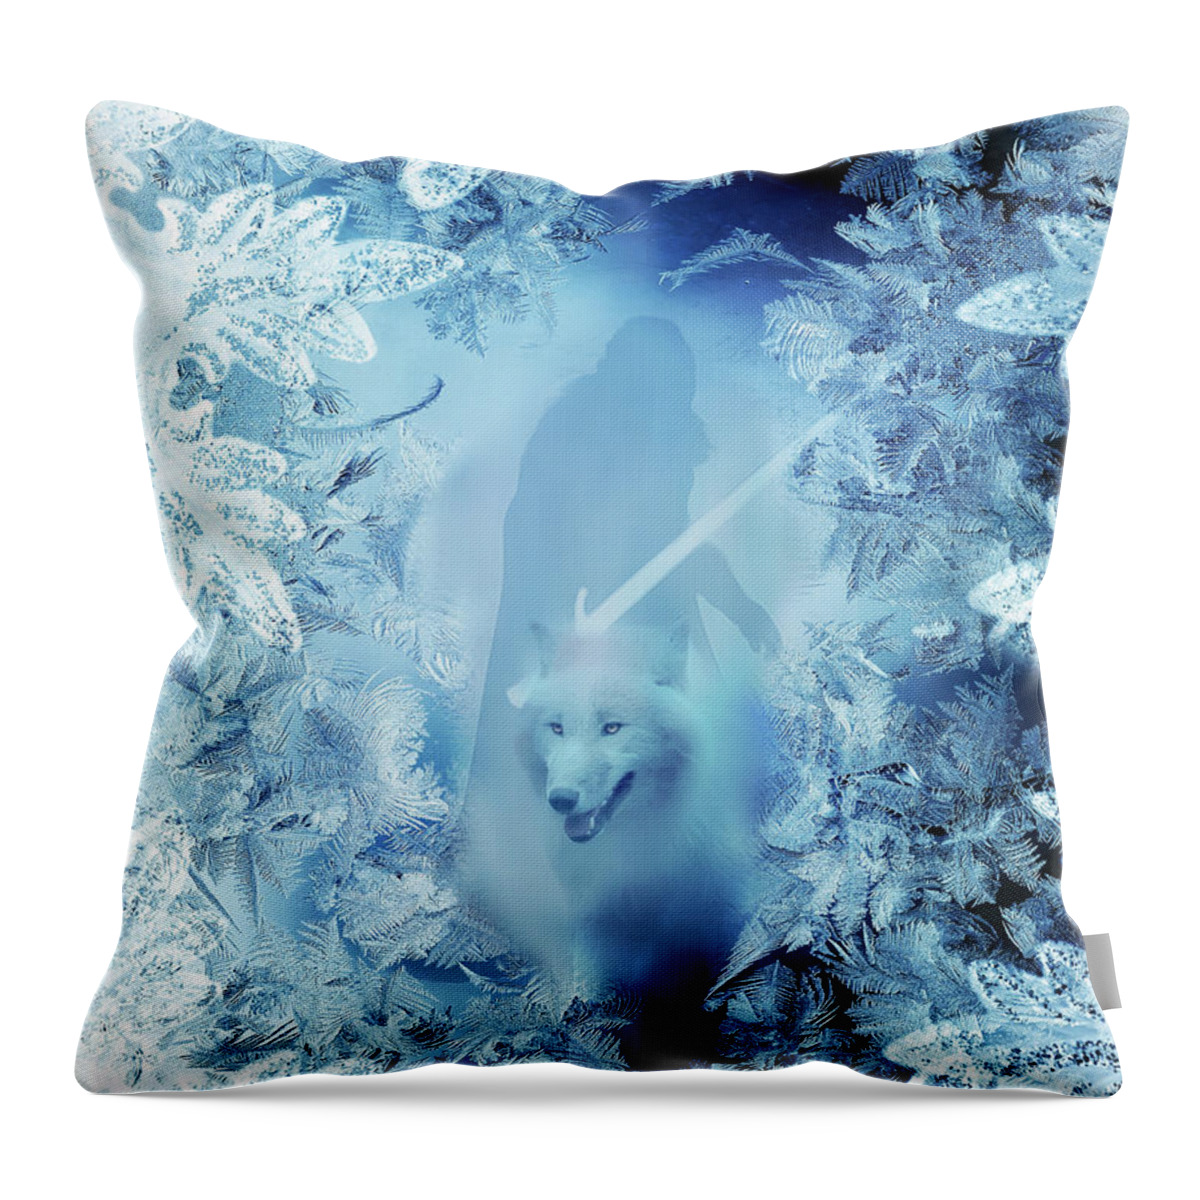 Jon Snow And Ghost Throw Pillow featuring the digital art Winter is here - Jon snow and Ghost - game of thrones by Lilia S